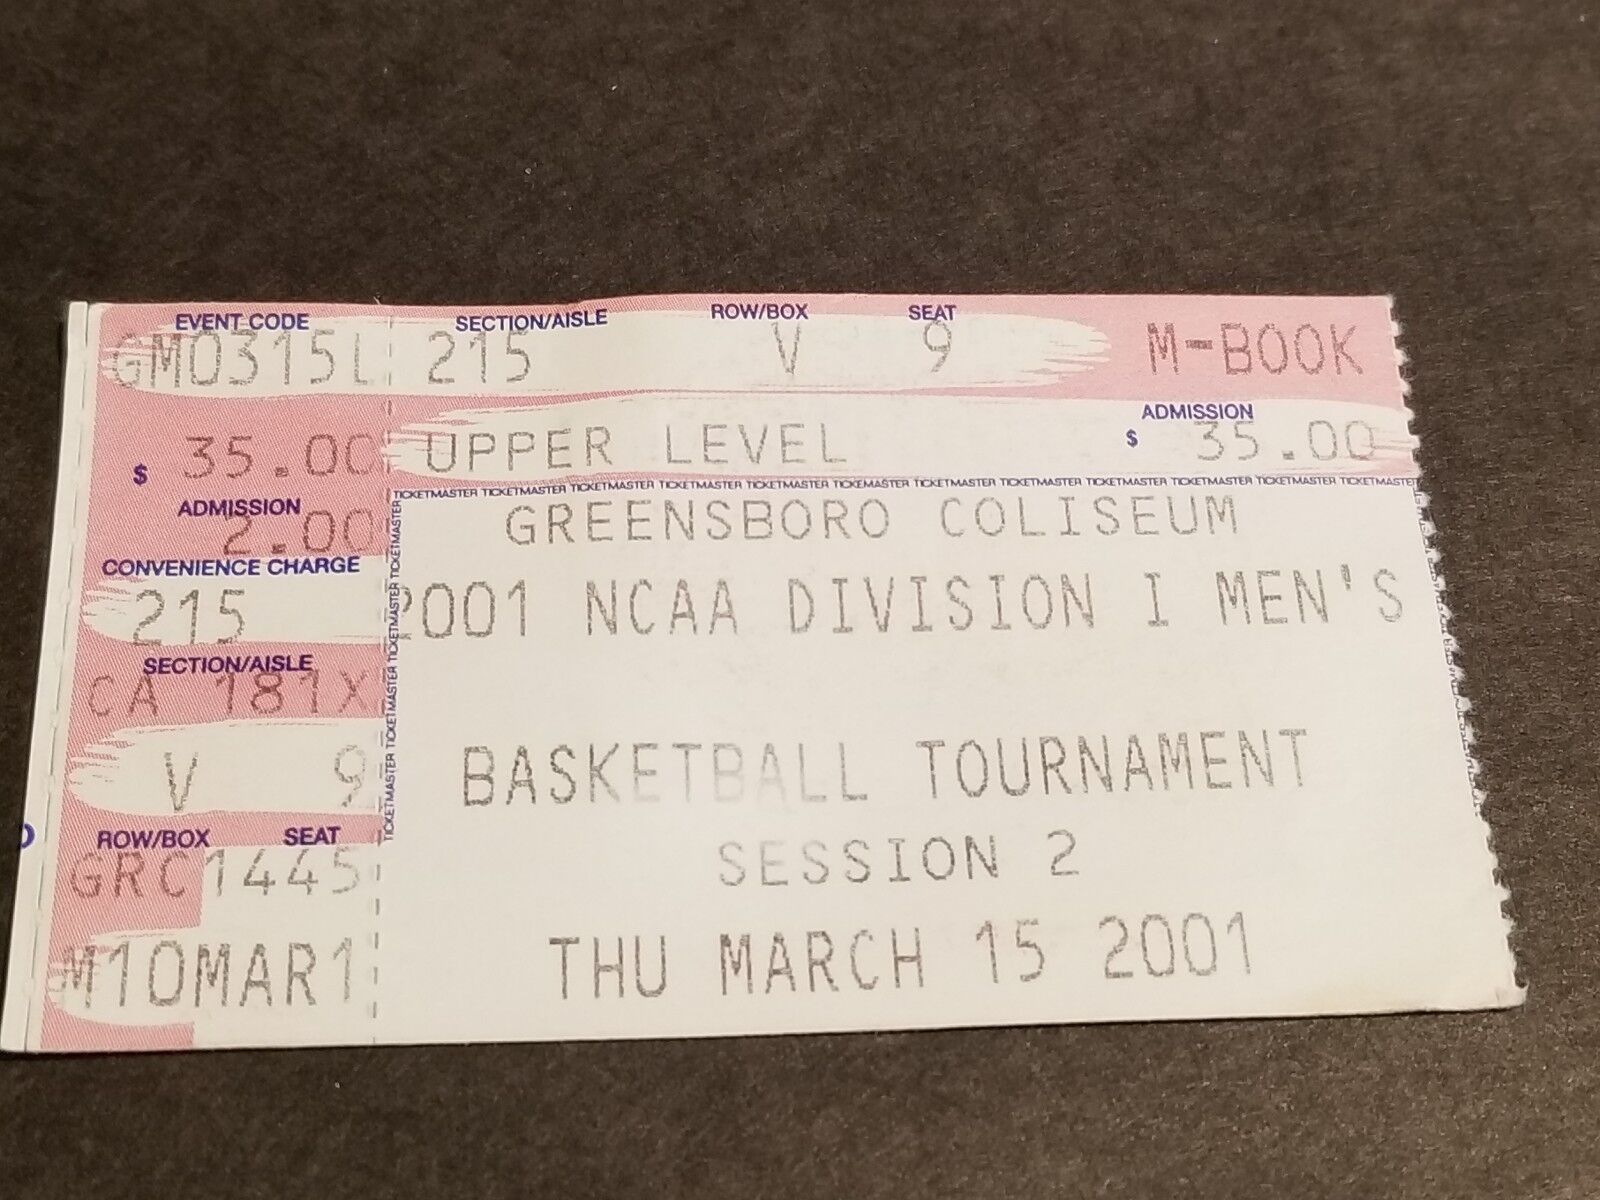 TICKET STUB MARCH 15 2001 NCAA DIVISION I BASKETBALL TOURNAMENT MARCH MADNESS 